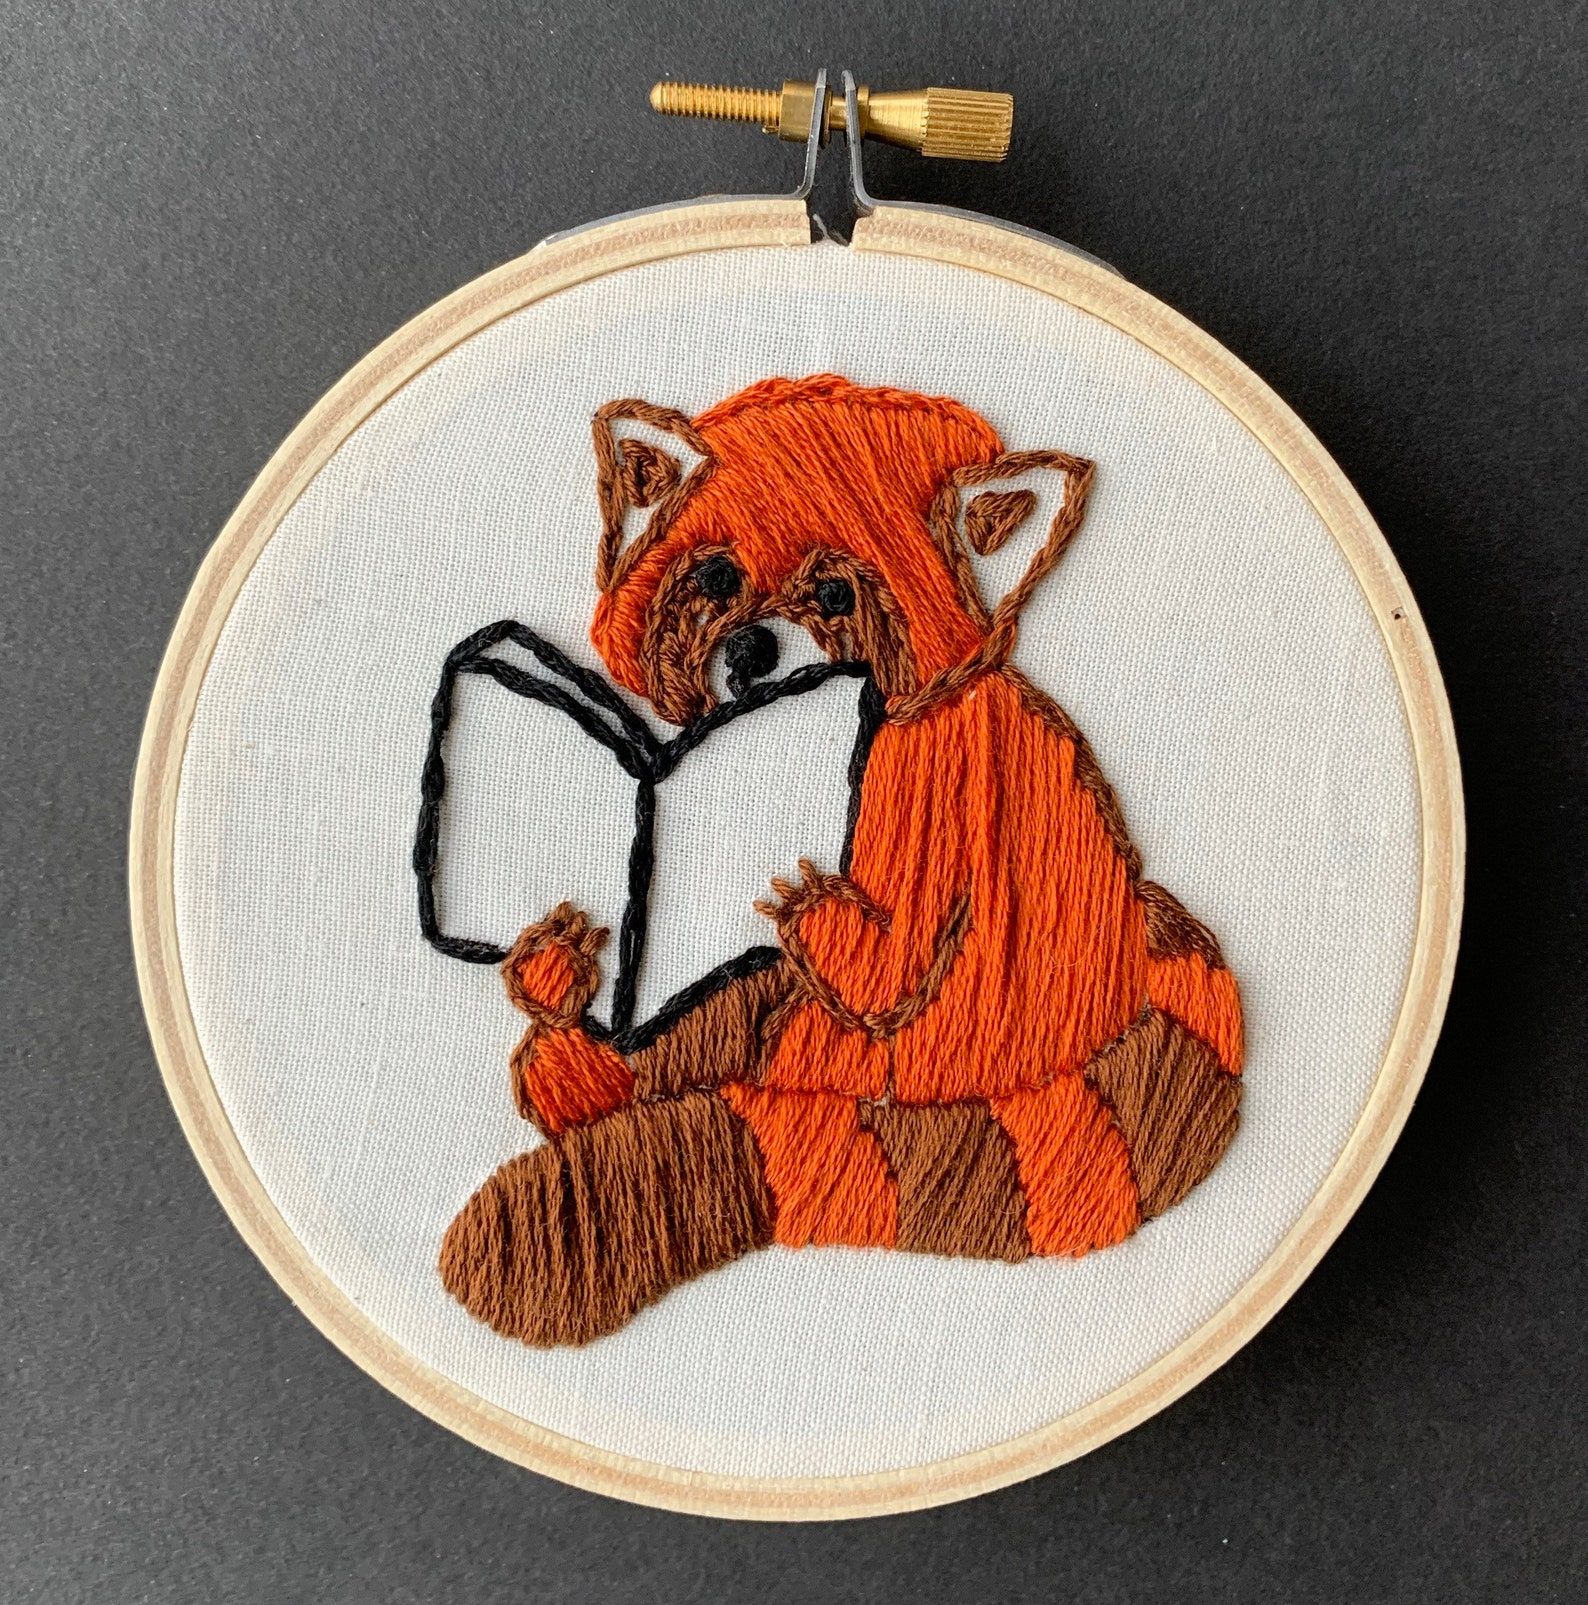 Image of a finished embroidery project, featuring a red panda reading a book. 